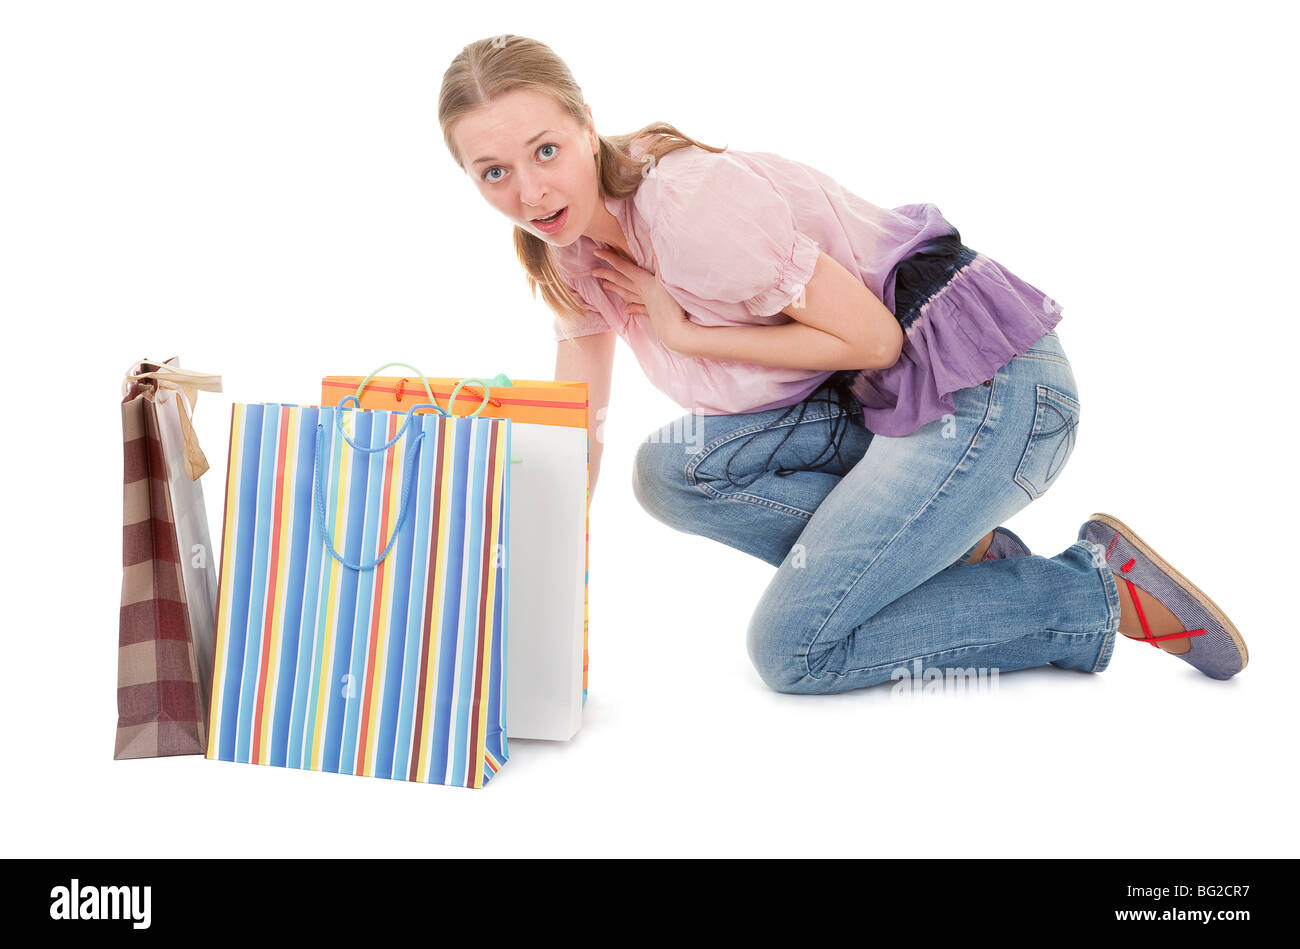 young girl with purchases on white background Stock Photo